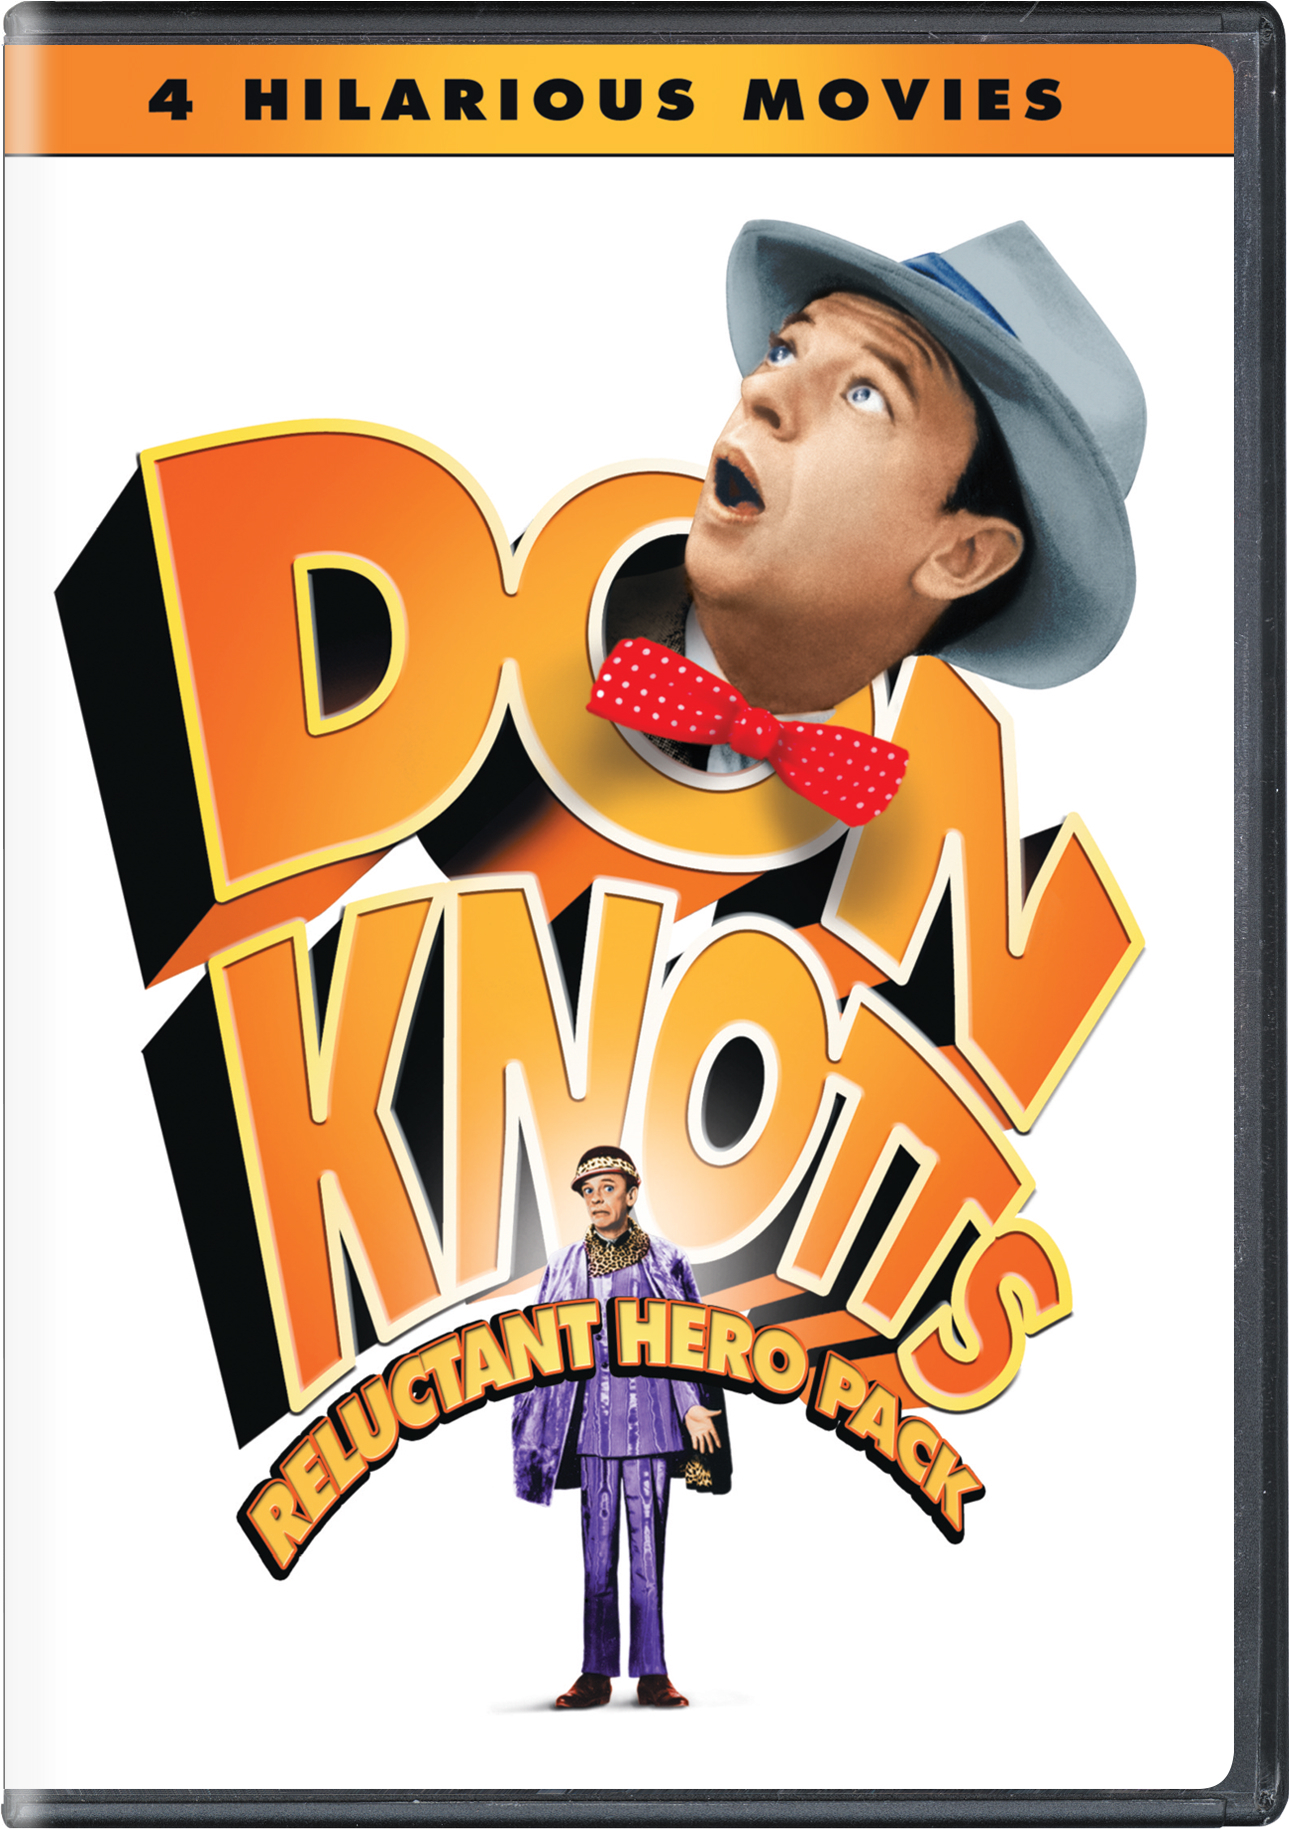 Don Knotts Reluctant Hero (DVD Set) - DVD   - Drama Movies On DVD - Movies On GRUV